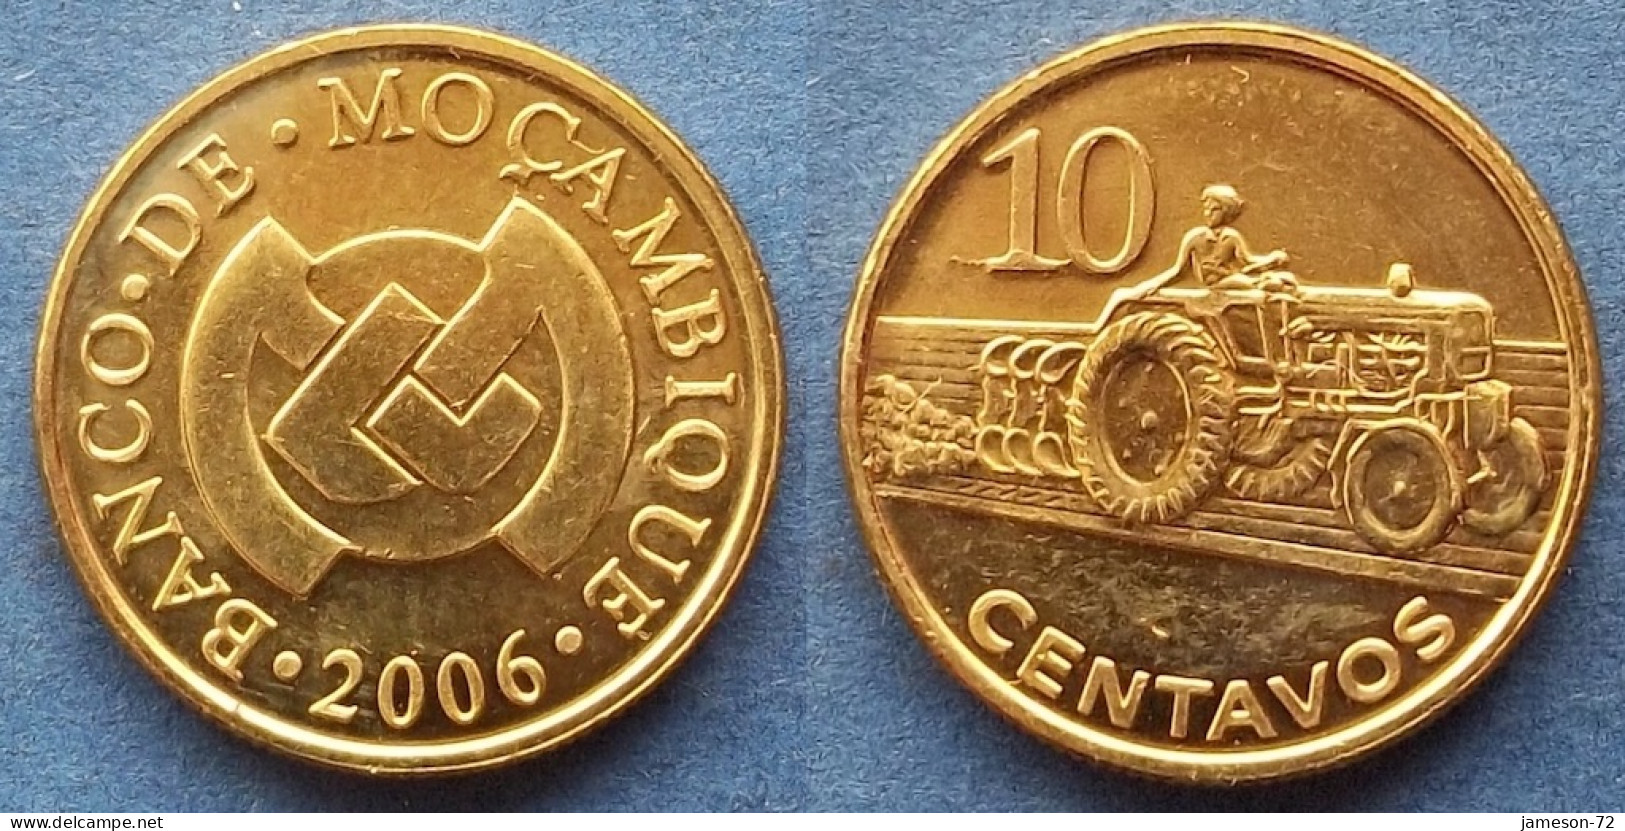 MOZAMBIQUE - 10 Centavos 2006 "Farmer Cultivating" KM# 134 Peoples Republic Reform Coinage (2006) - Edelweiss Coins - Mosambik